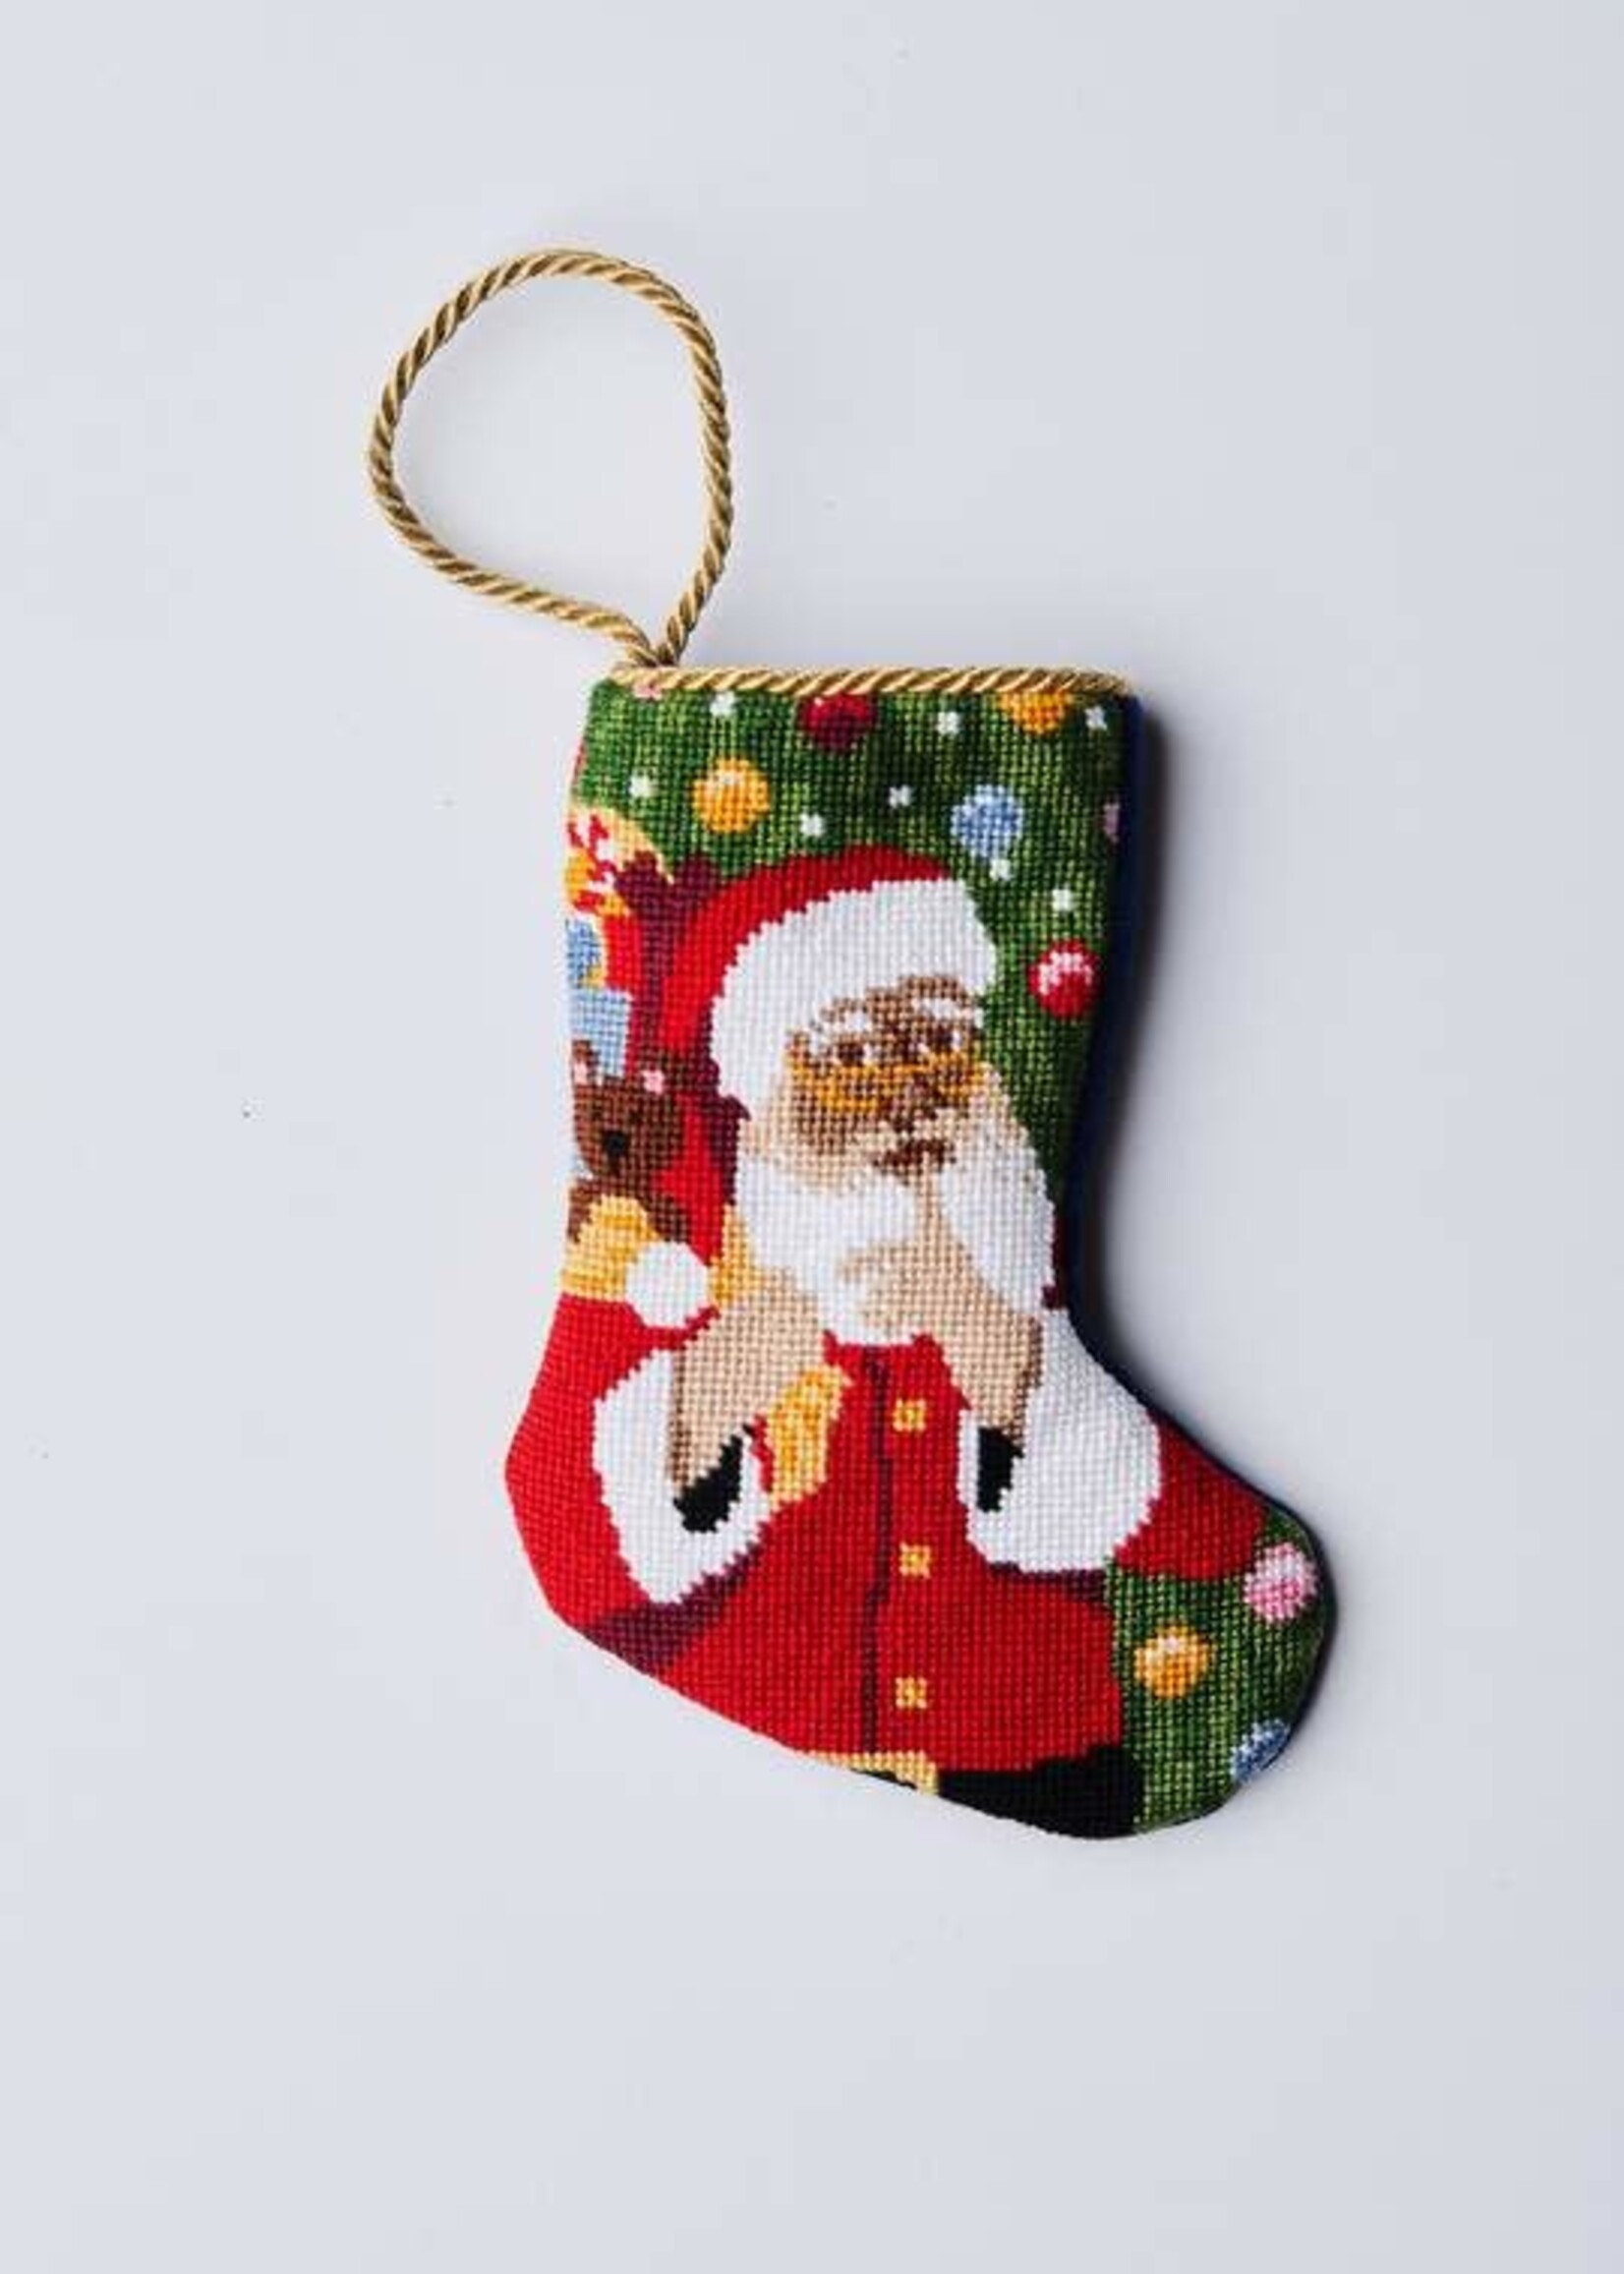 Bauble Stockings Bauble Stocking Jolly Old St. Nick